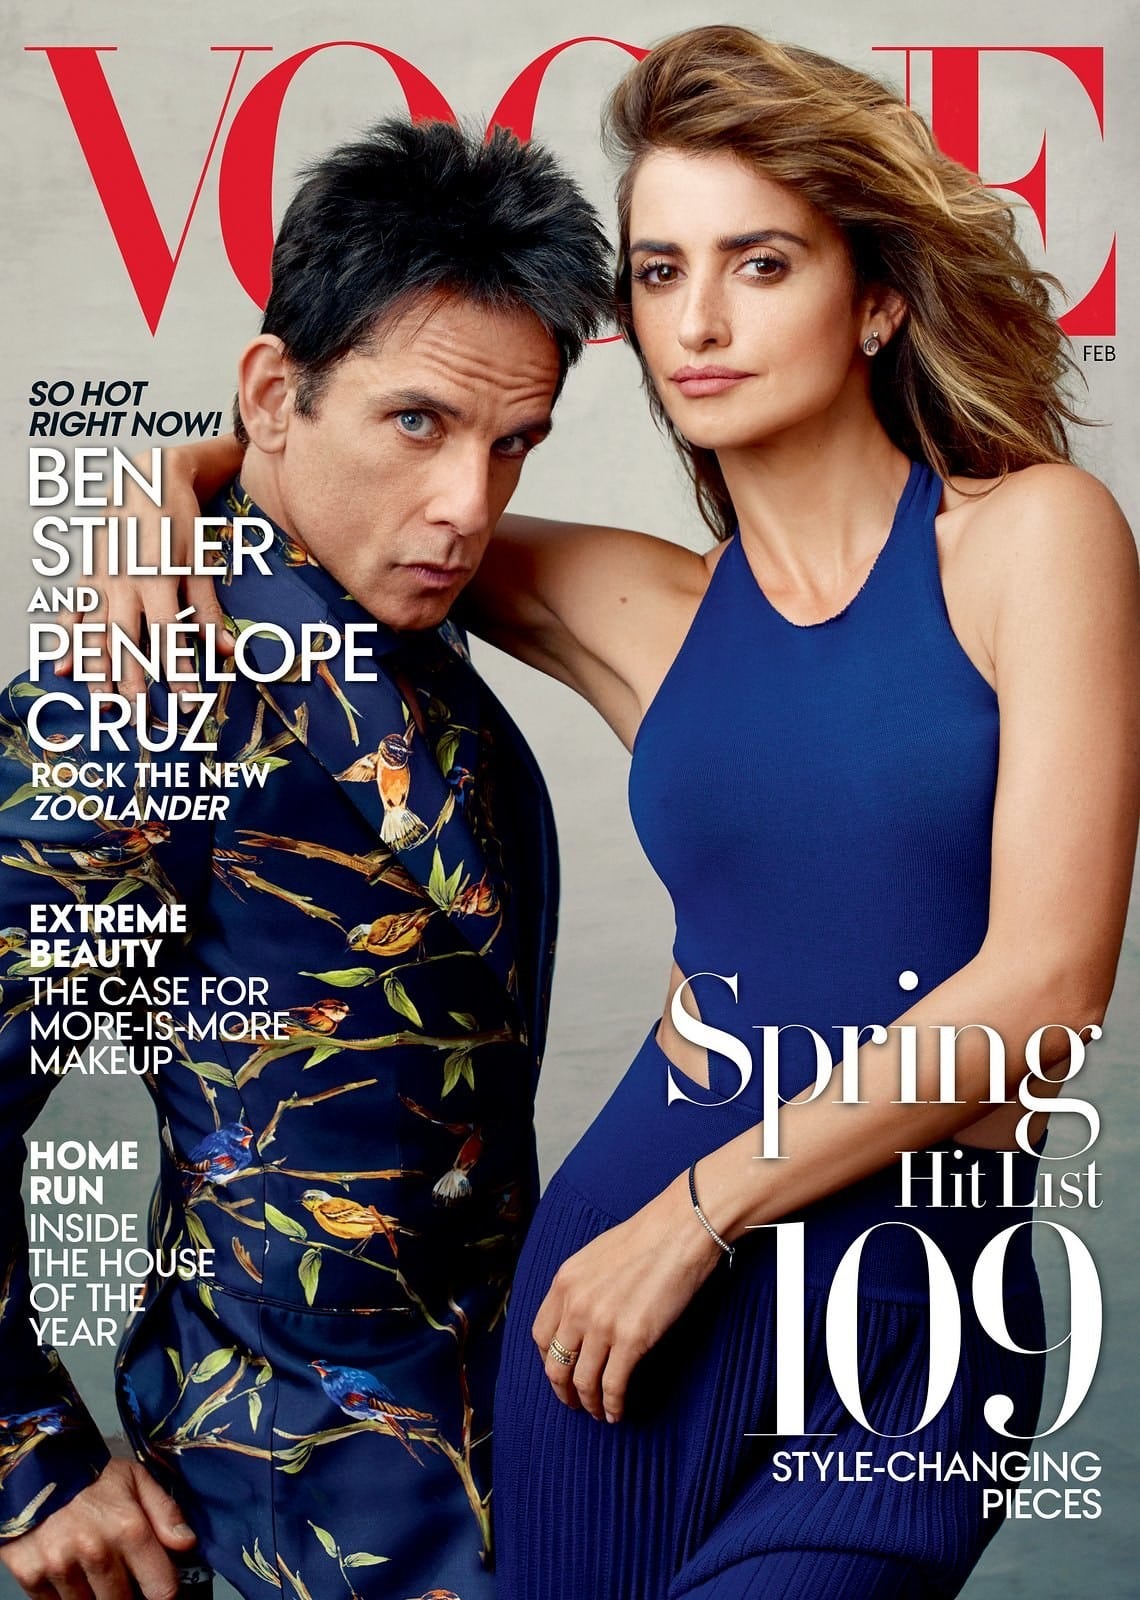 Ben Stiller and Penélope Cruz on the cover of Vogue by Annie Leibovitz